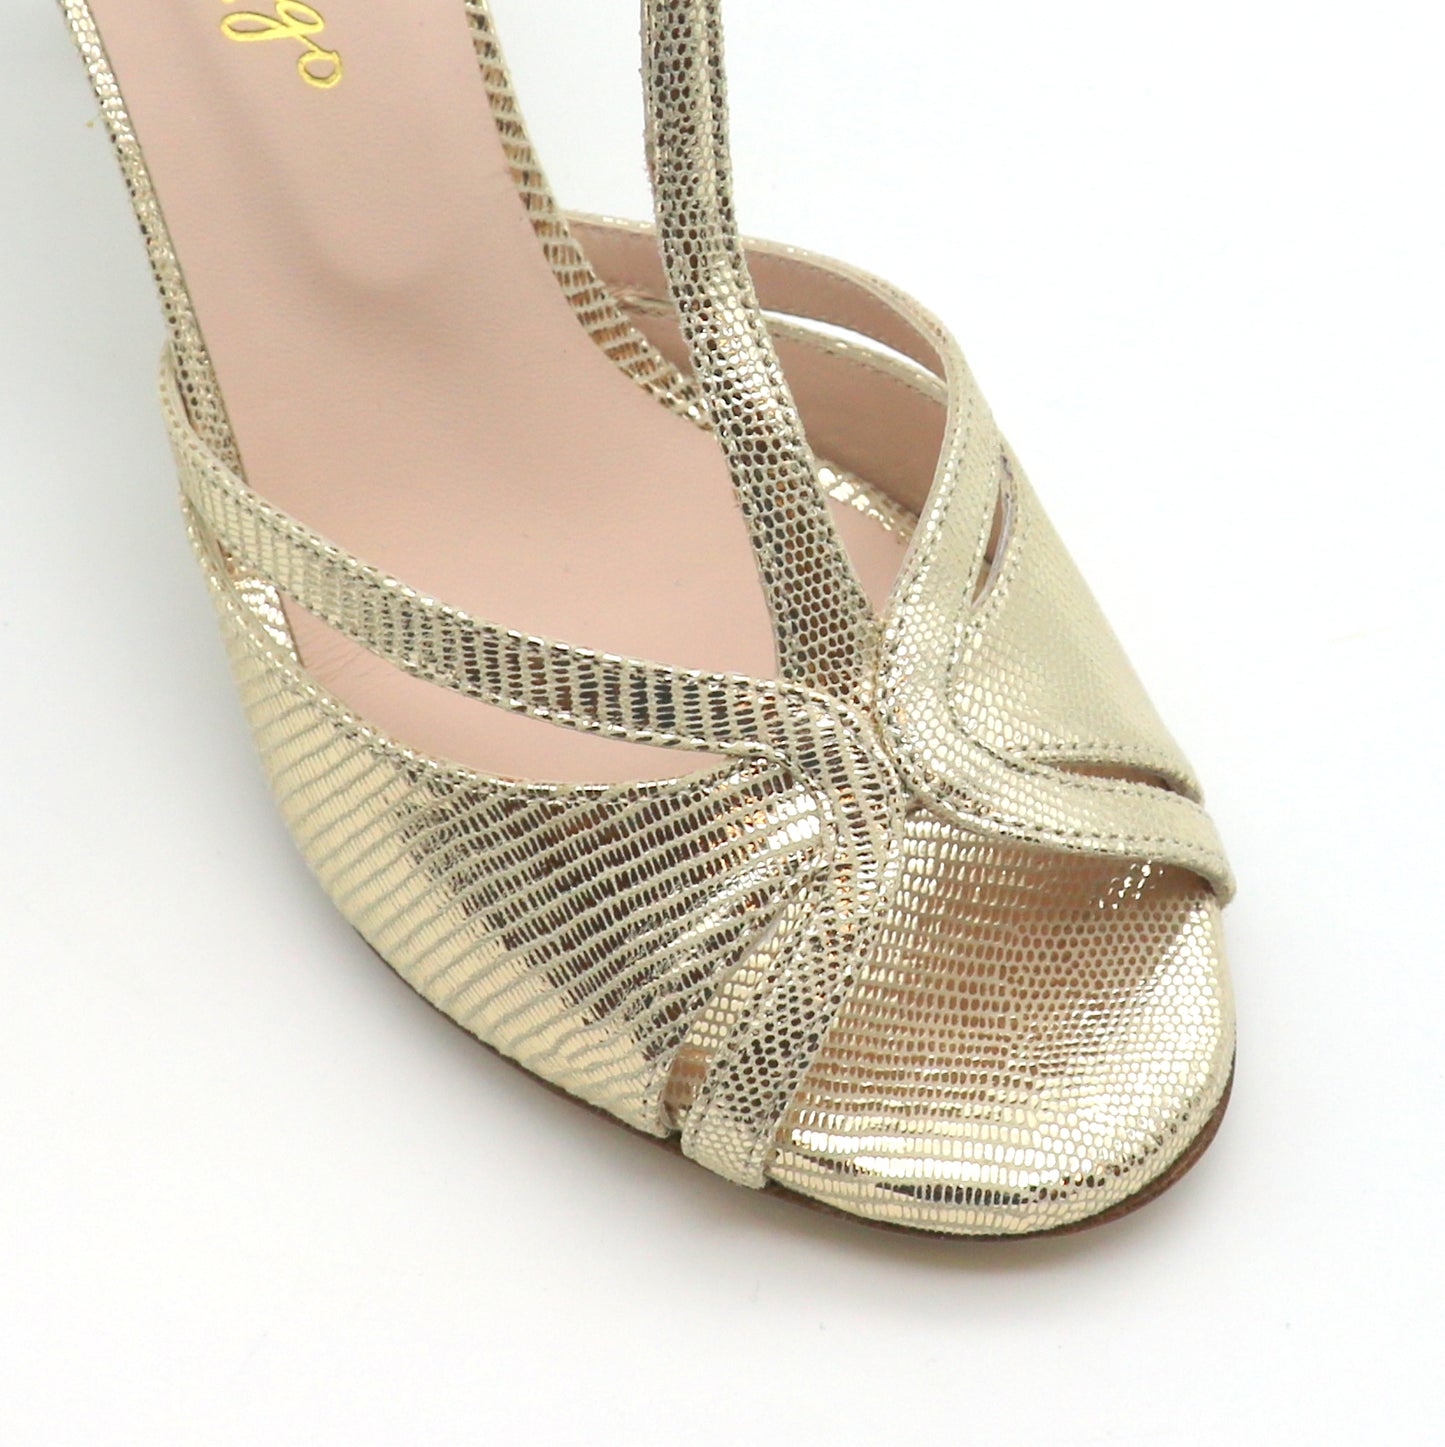 Coco gold snake style heels 7cm